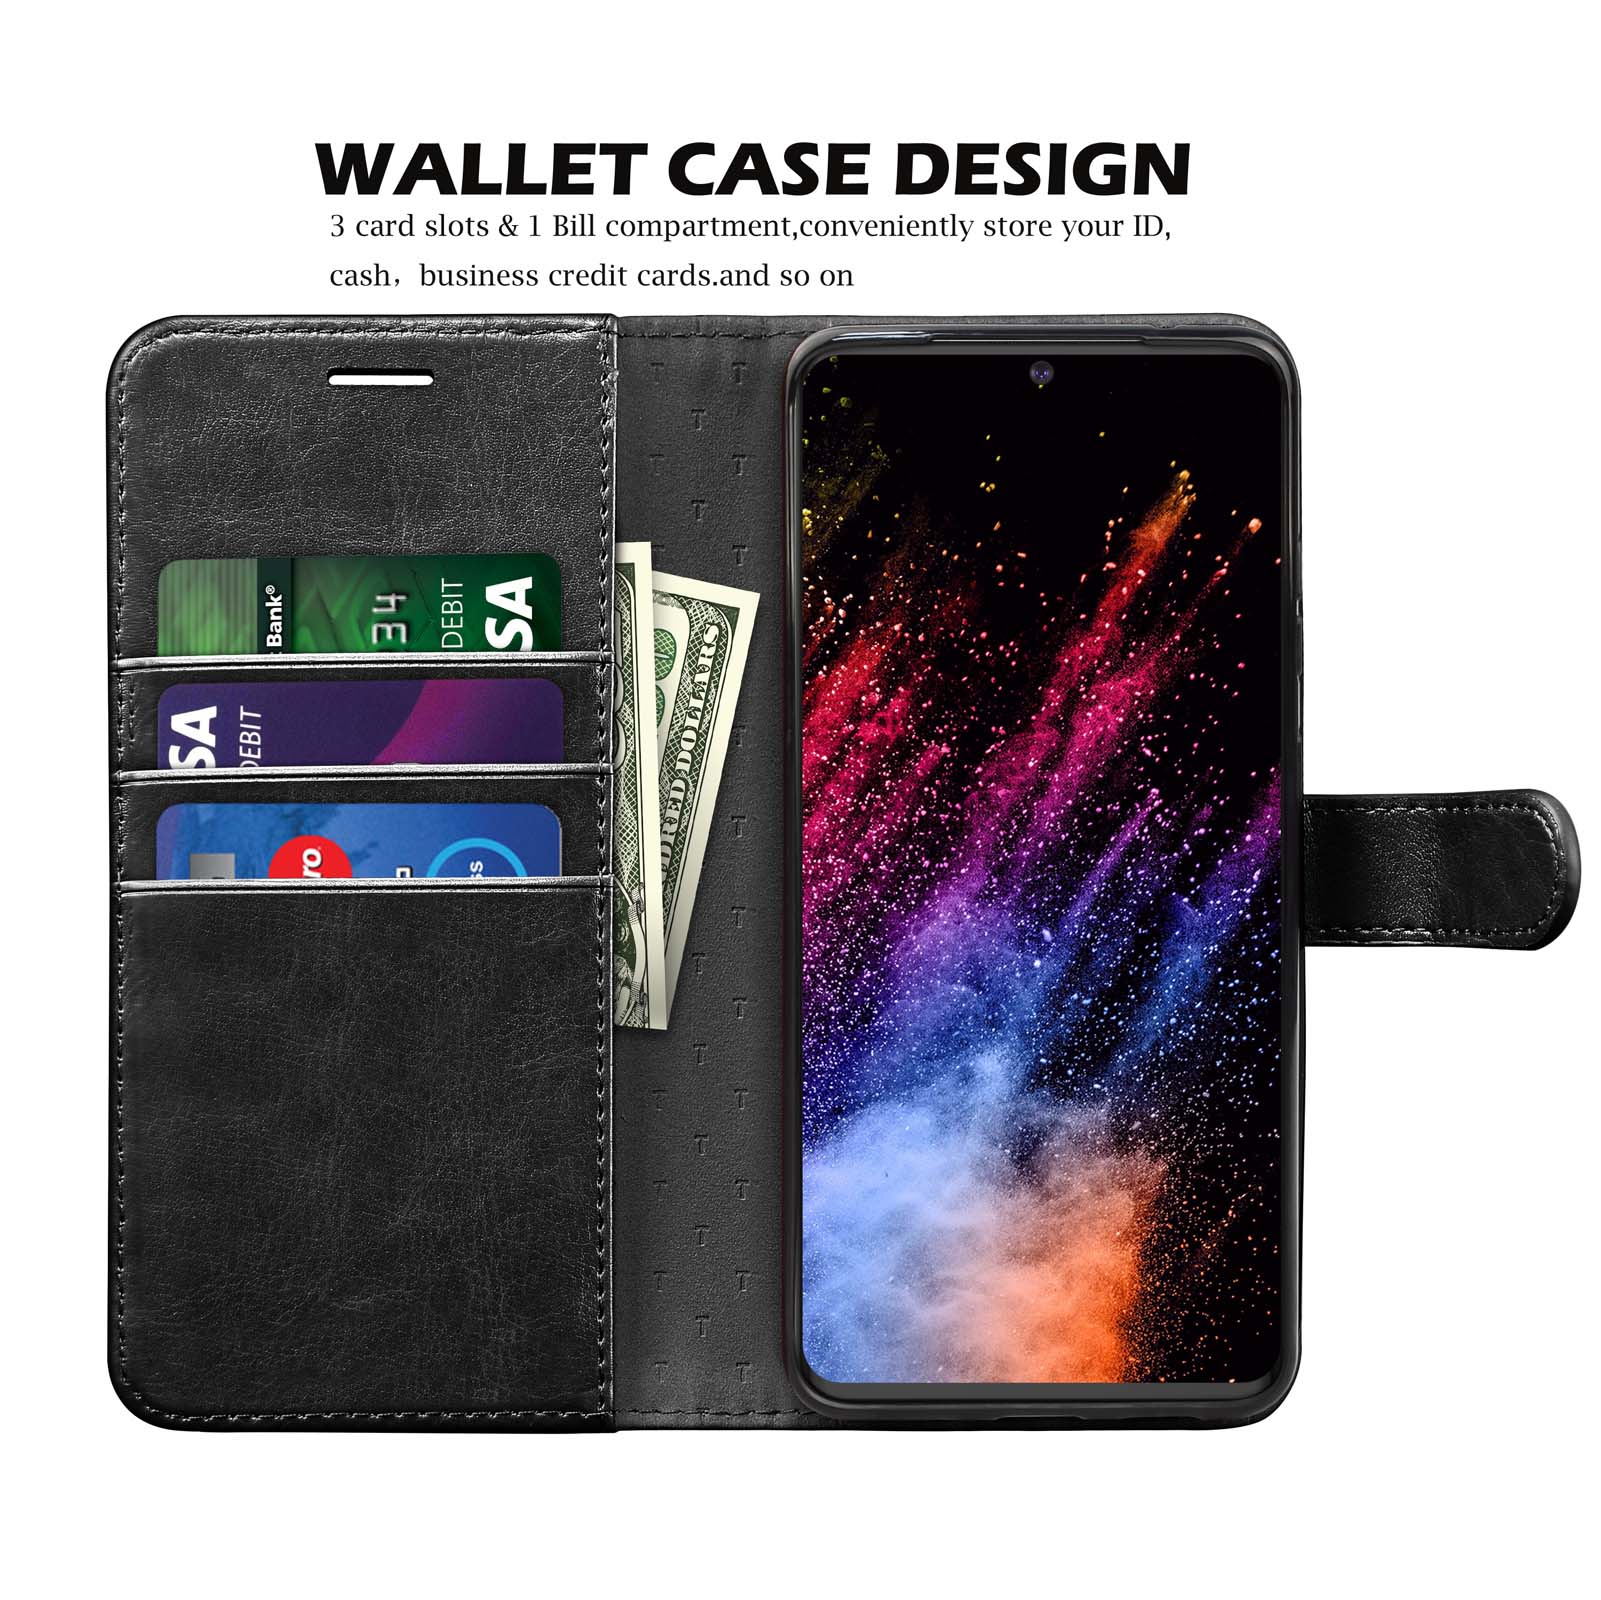 Njjex Case Wallet 2020 Galaxy S20 Ultra S20 S20+ S20 Plus 5G, Galaxy S20 S20 Ultra Wallet Case RFID Blocking Card Slot Stand PU Leather Magnetic Protect Flip Cover [Gift Box] -Black - image 2 of 10